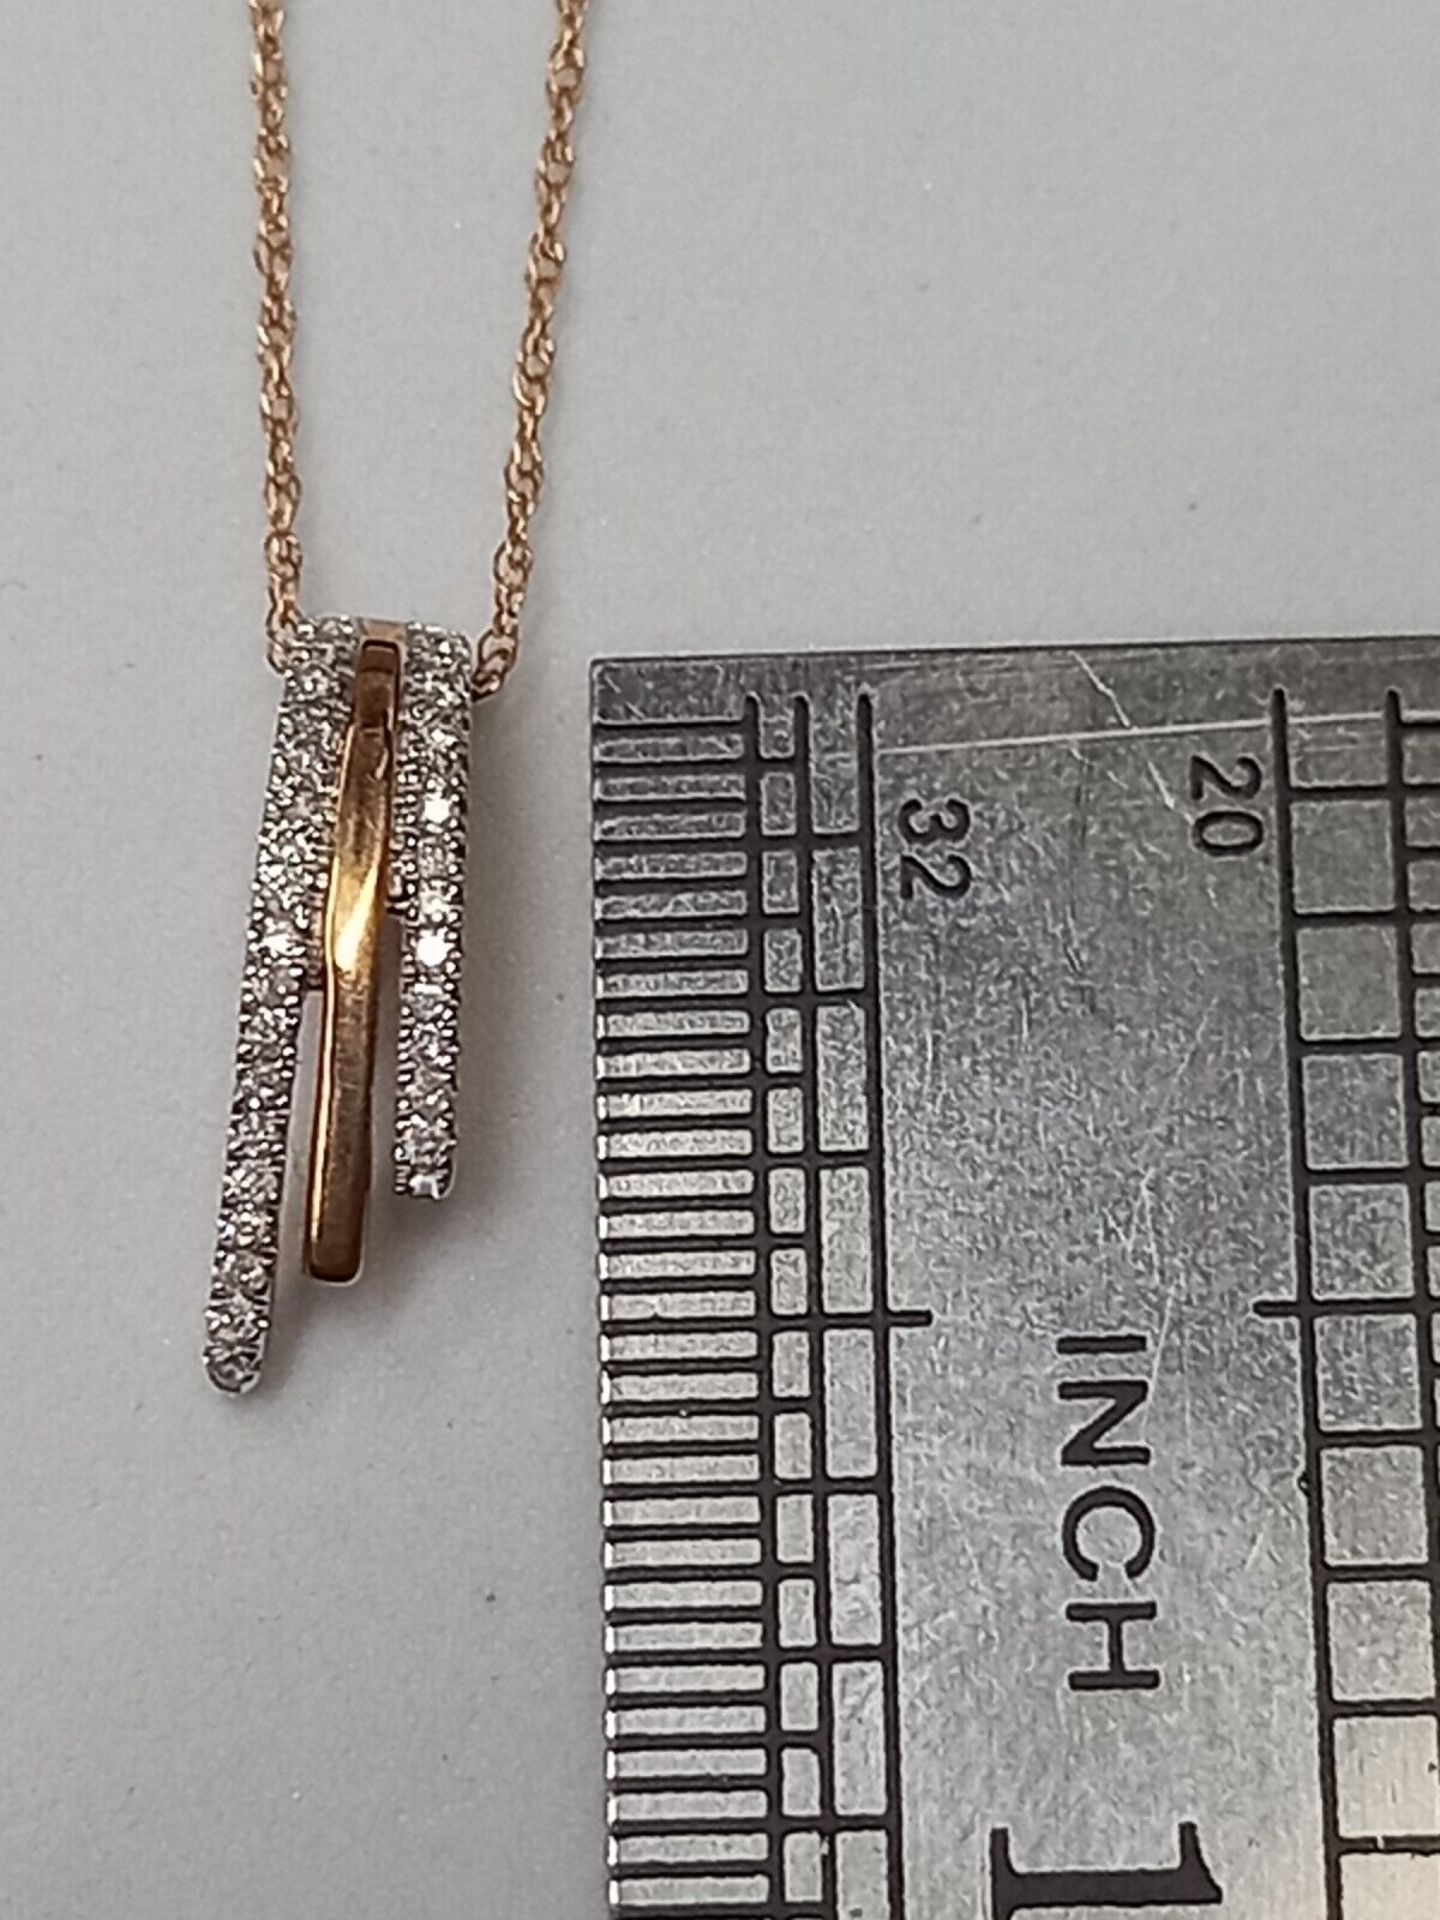 0.24CT DIAMOND ROSE GOLD PENDANT /9CT FINE GOLD CHAIN IN GIFT BOX WITH VALUATION CERTIFICATE - Image 4 of 4